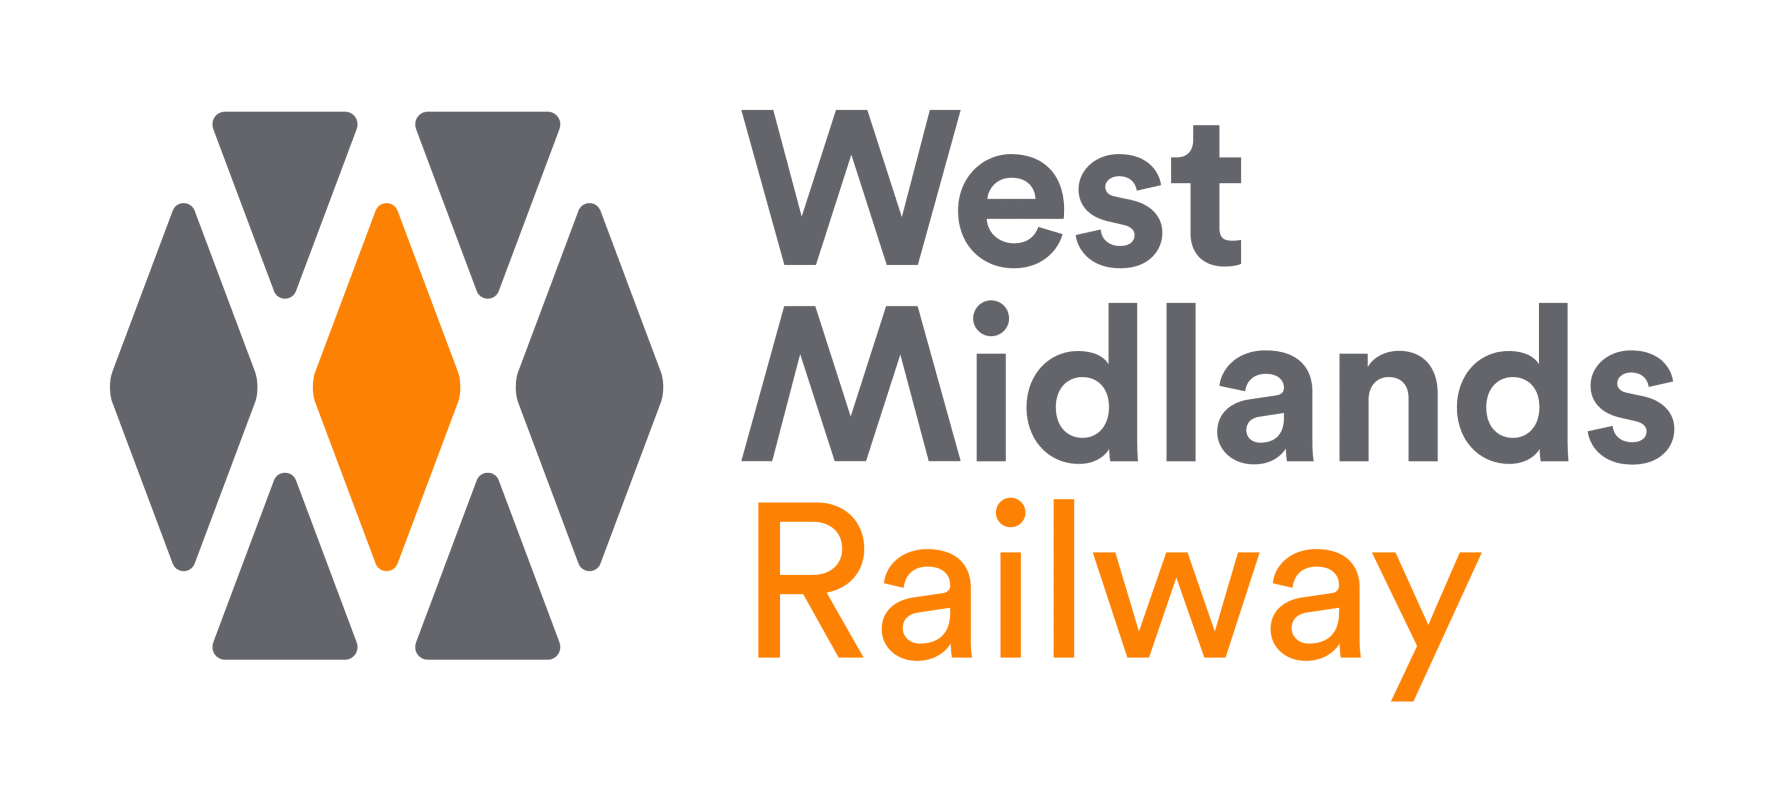 West Midlands Railway lifts restrictions to help pensioners and disabled access essential supplies as revised timetable begins